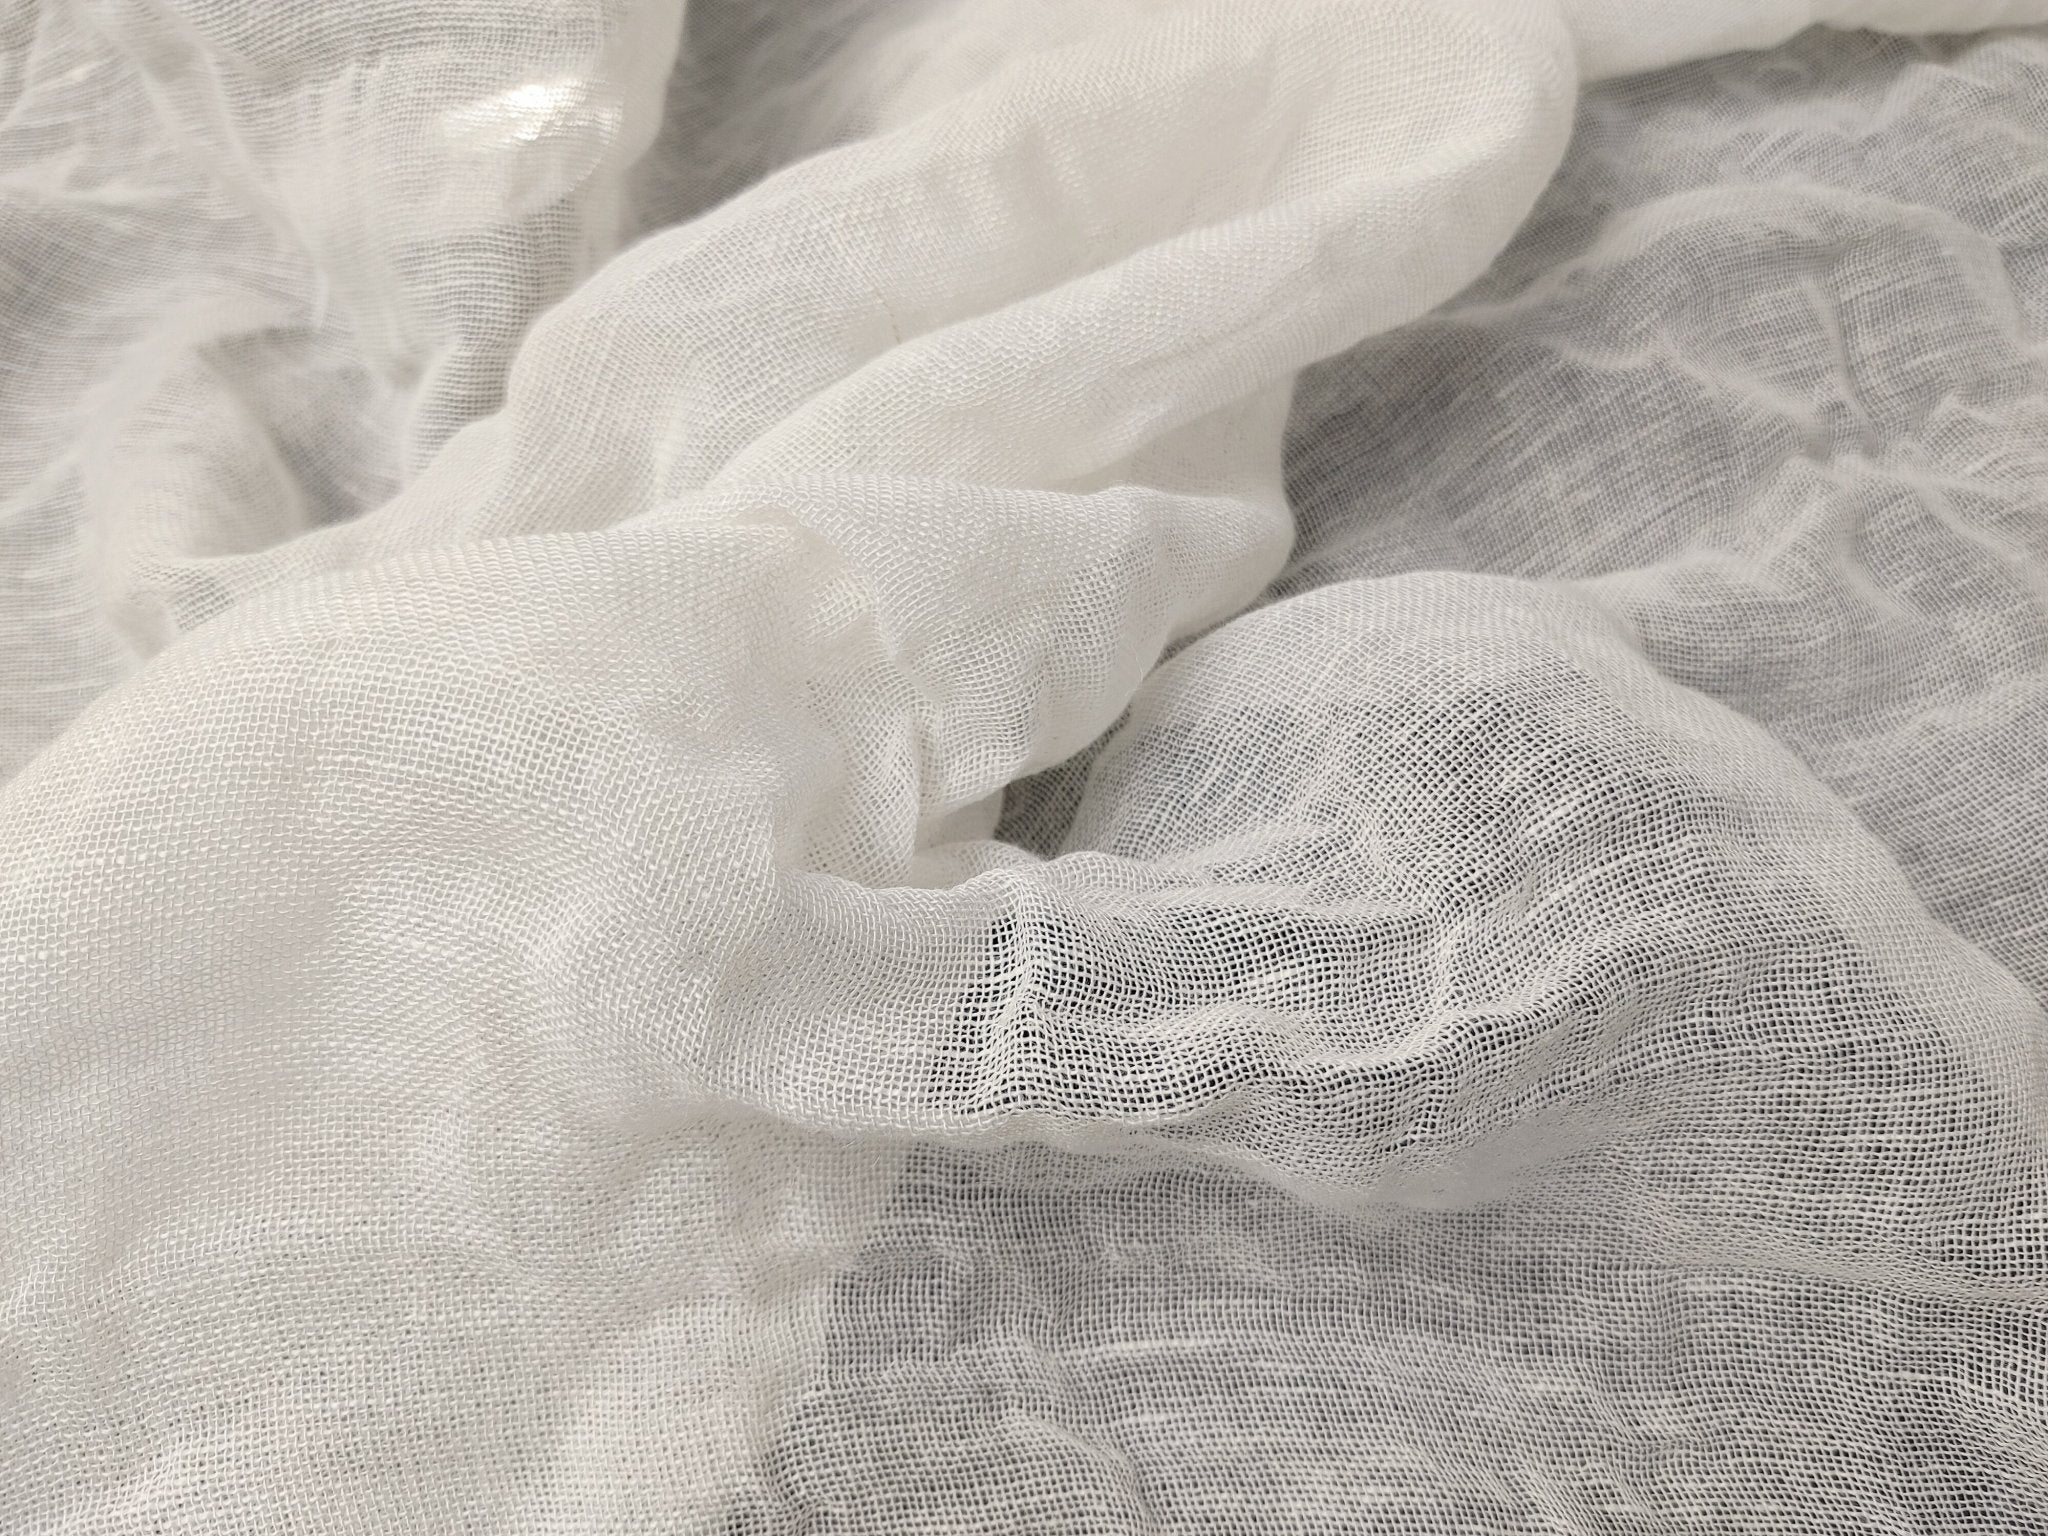 White Sheer Linen Rayon Ramie Mesh Fabric with Wrinkle Effect 2783 - The Linen Lab - White